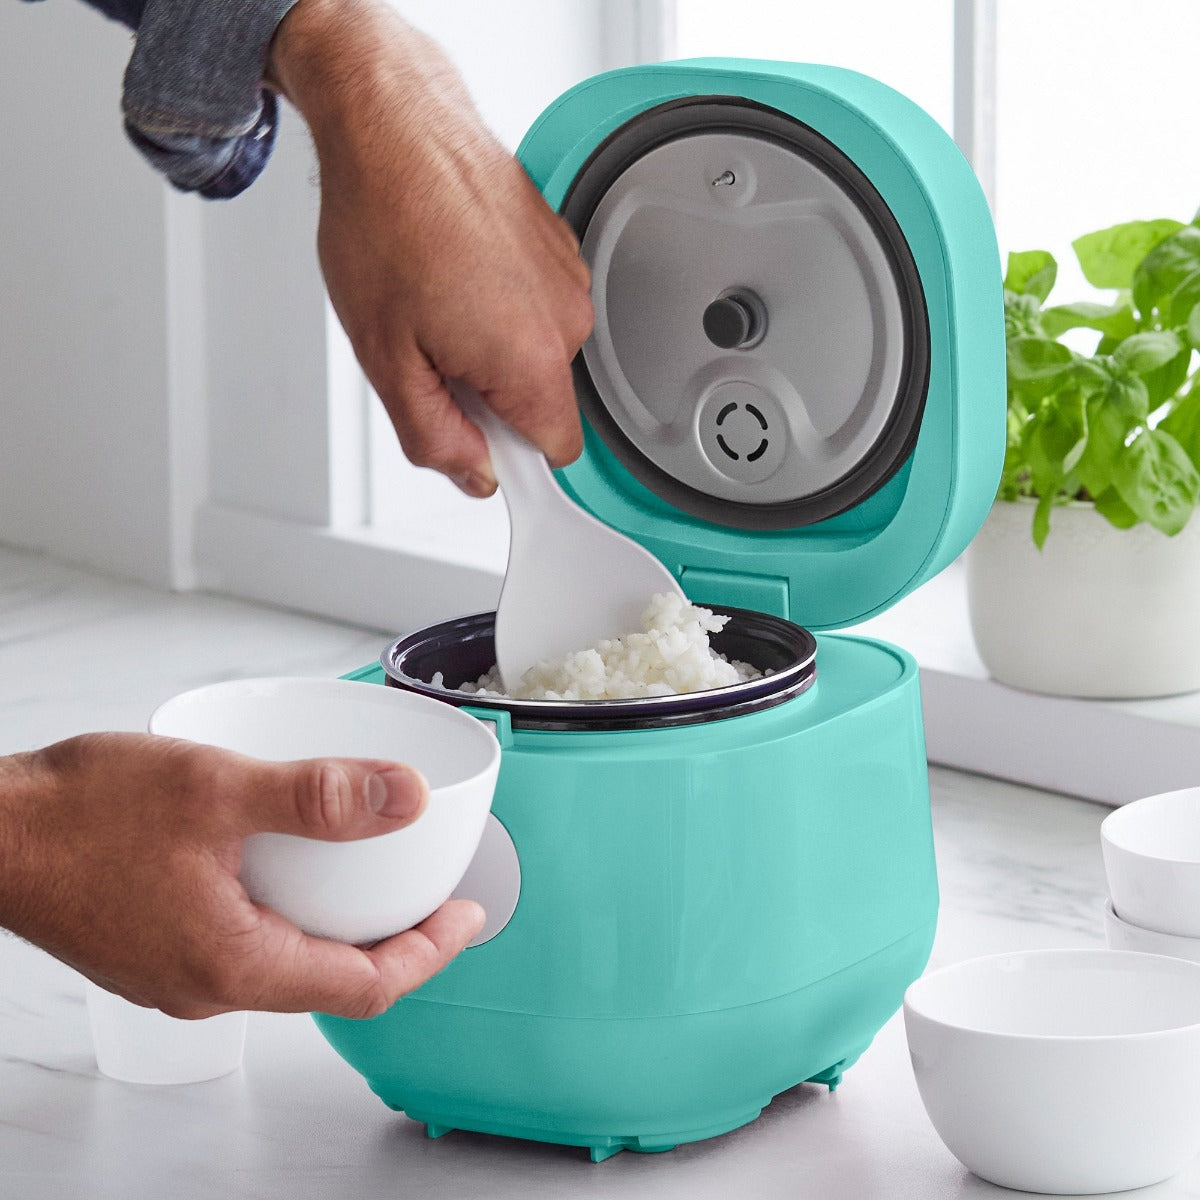 GreenLife Rice Cooker, Turquoise